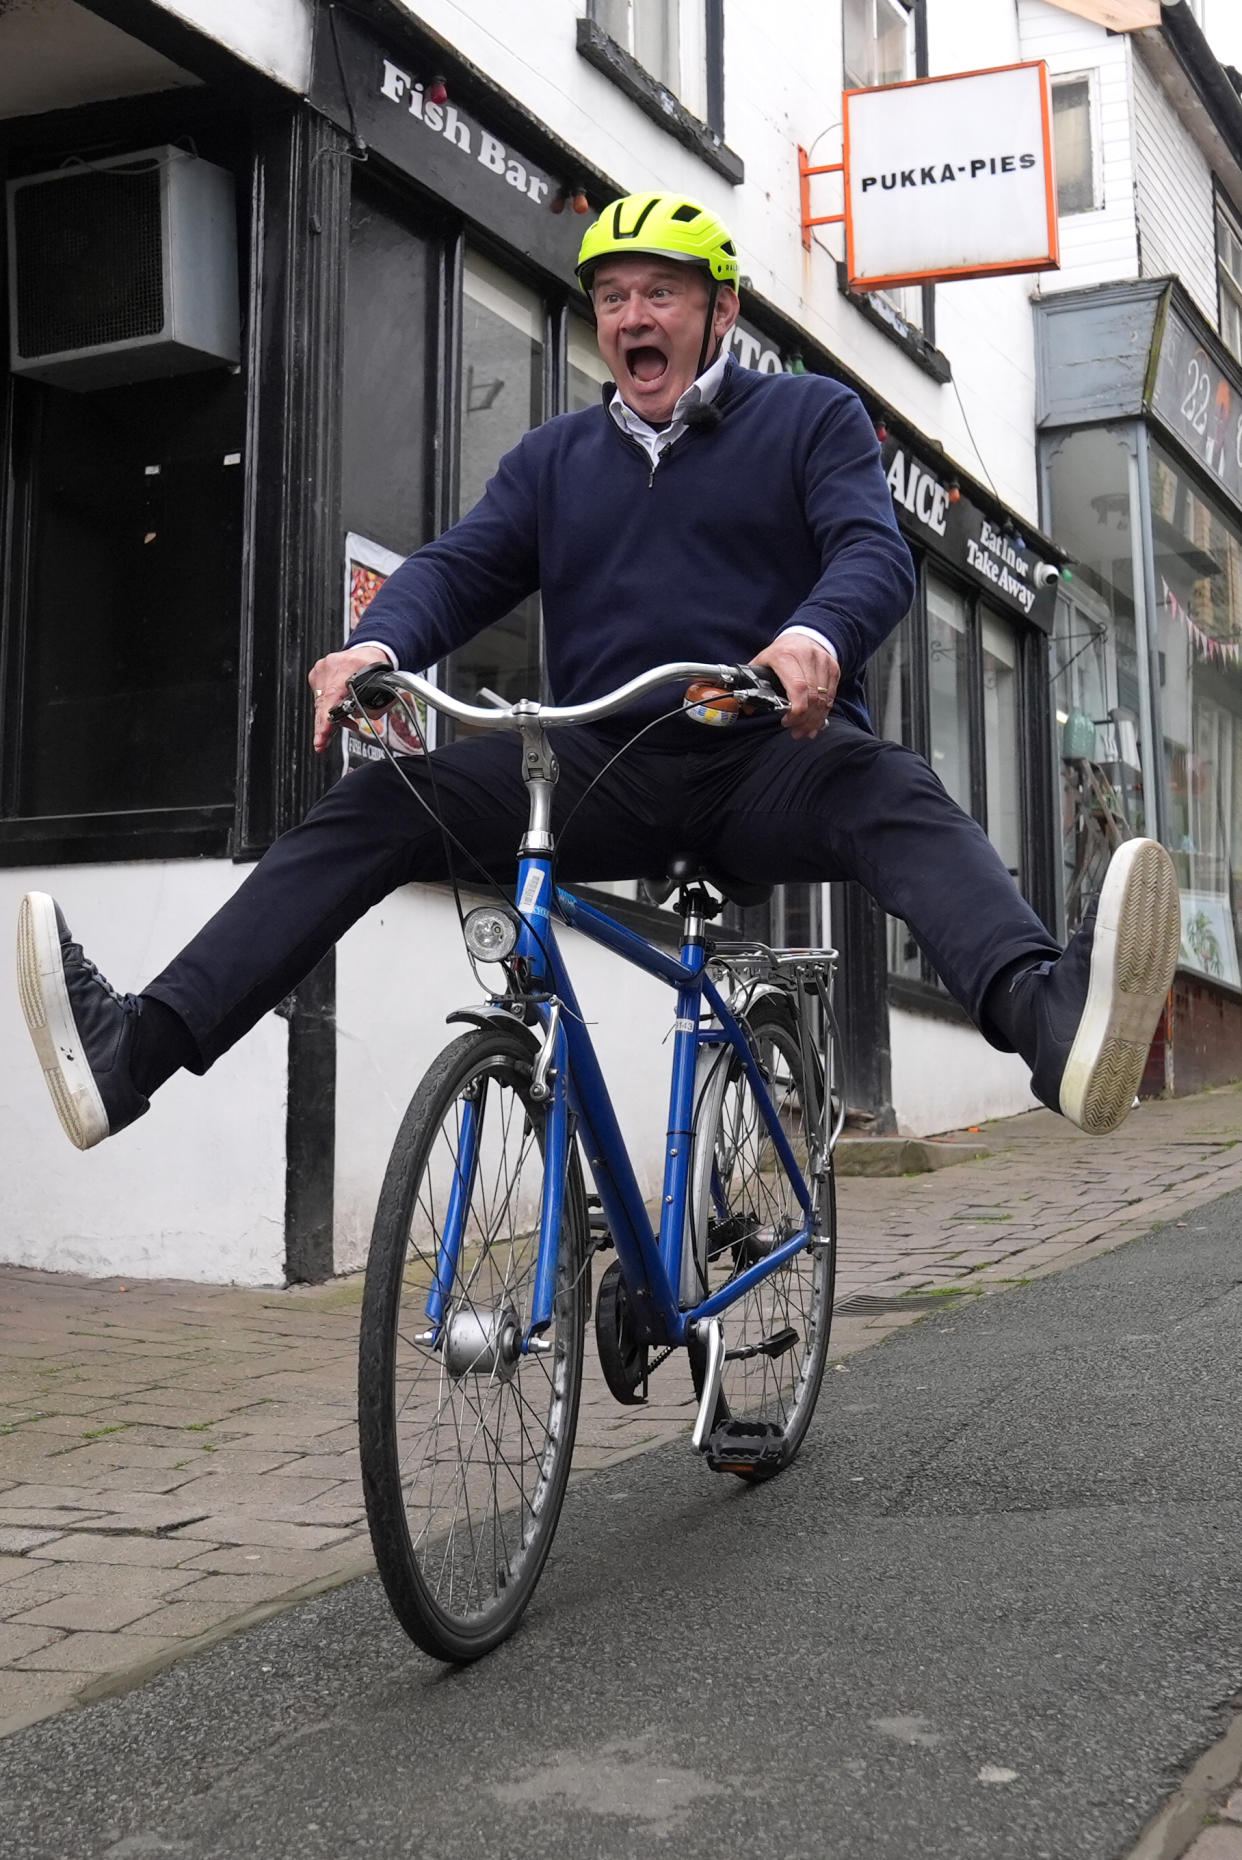 It’s all downhill from here for Lib Dem Leader Sir Ed Davey as he rides a bike in Knighton, Powys (Jacob King/PA)